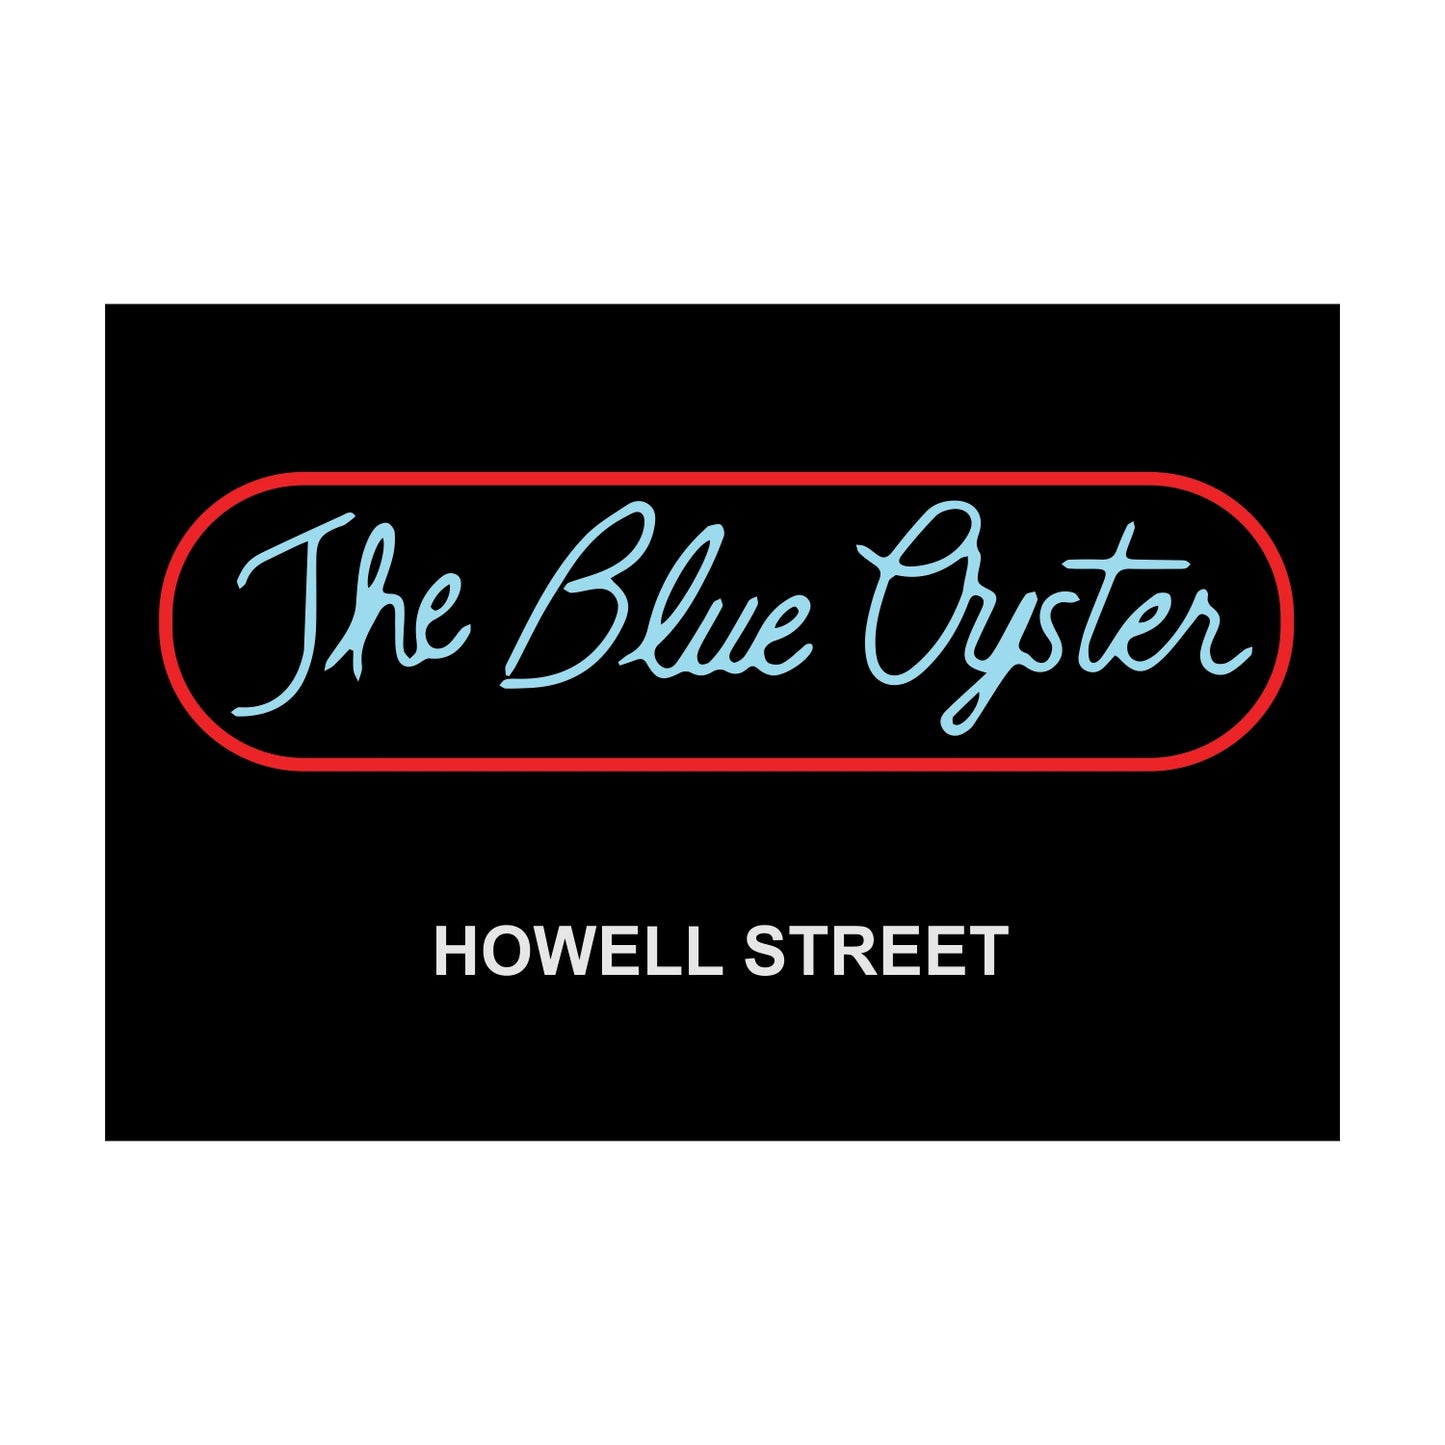 Blue Oyster Sign from Police Academy